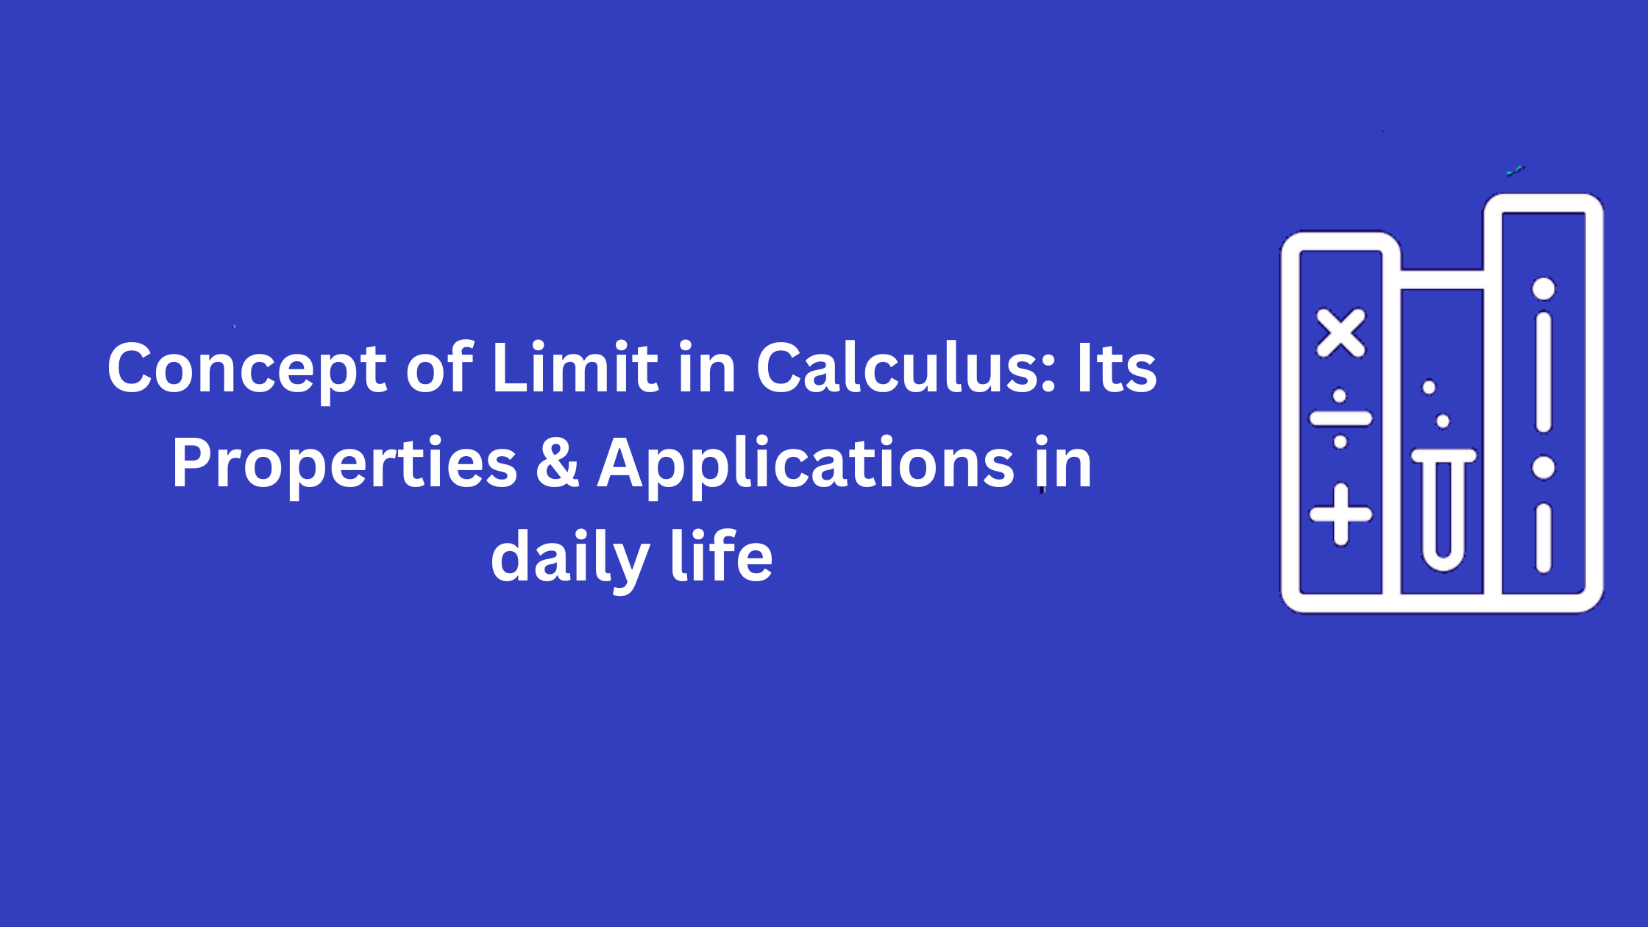 Concept of Limit in Calculus